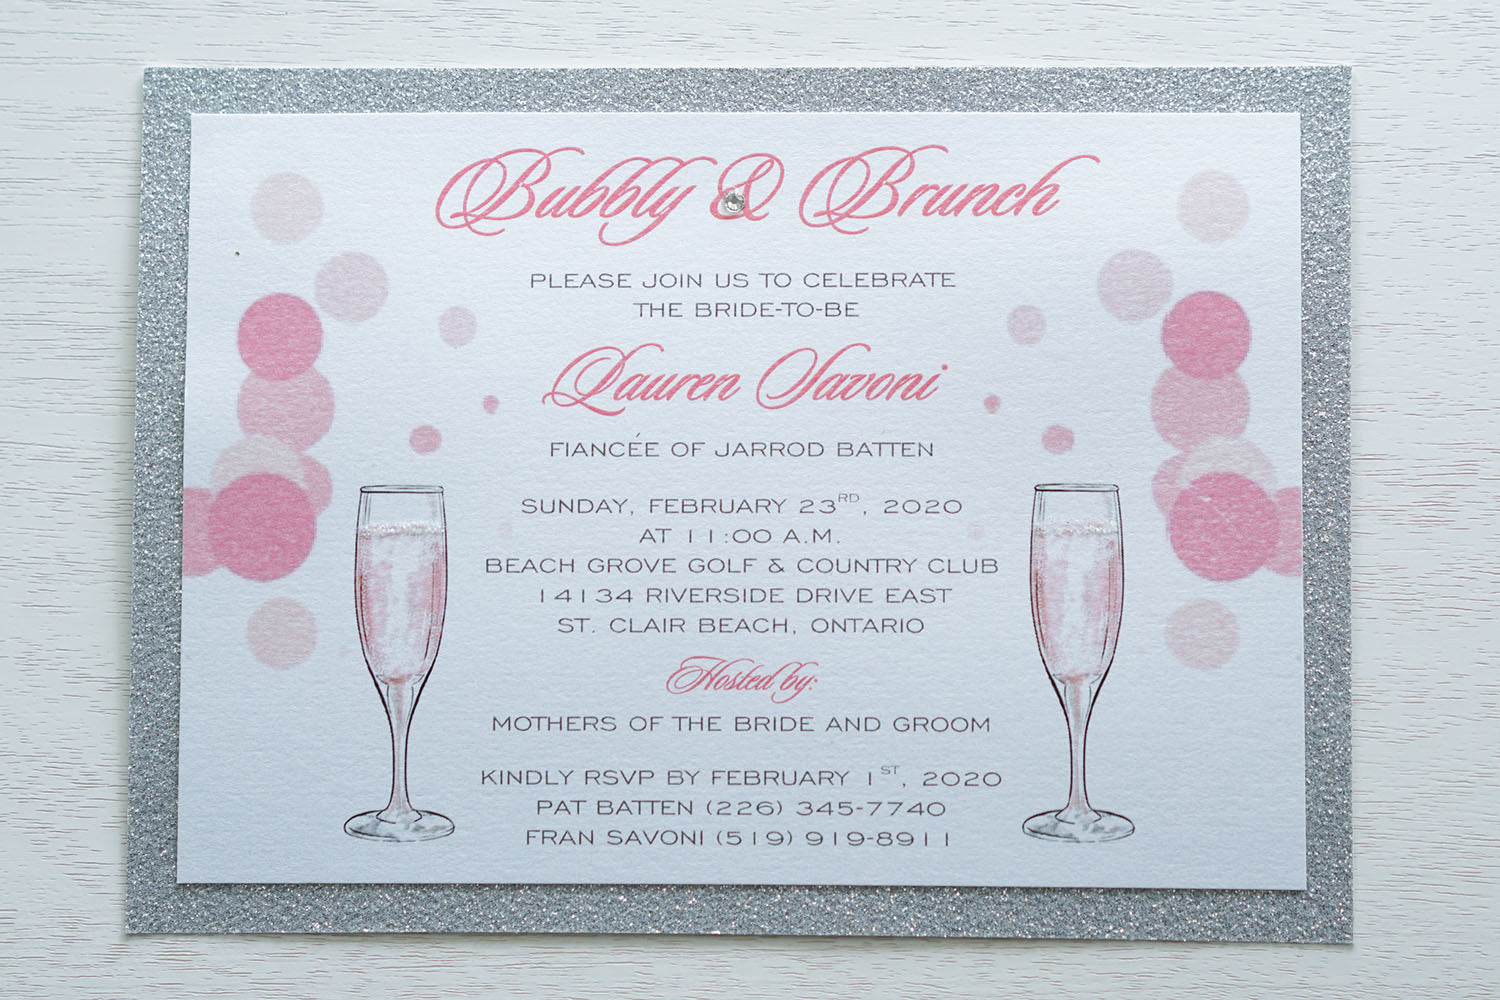 alt="Sparkling glitter Bridal Shower invitation features a white pearlescent shimmer card stock on a silver glitter stock, a champagne flutes and bubbly design, jewel detail and glitter sparkle to finish it off"